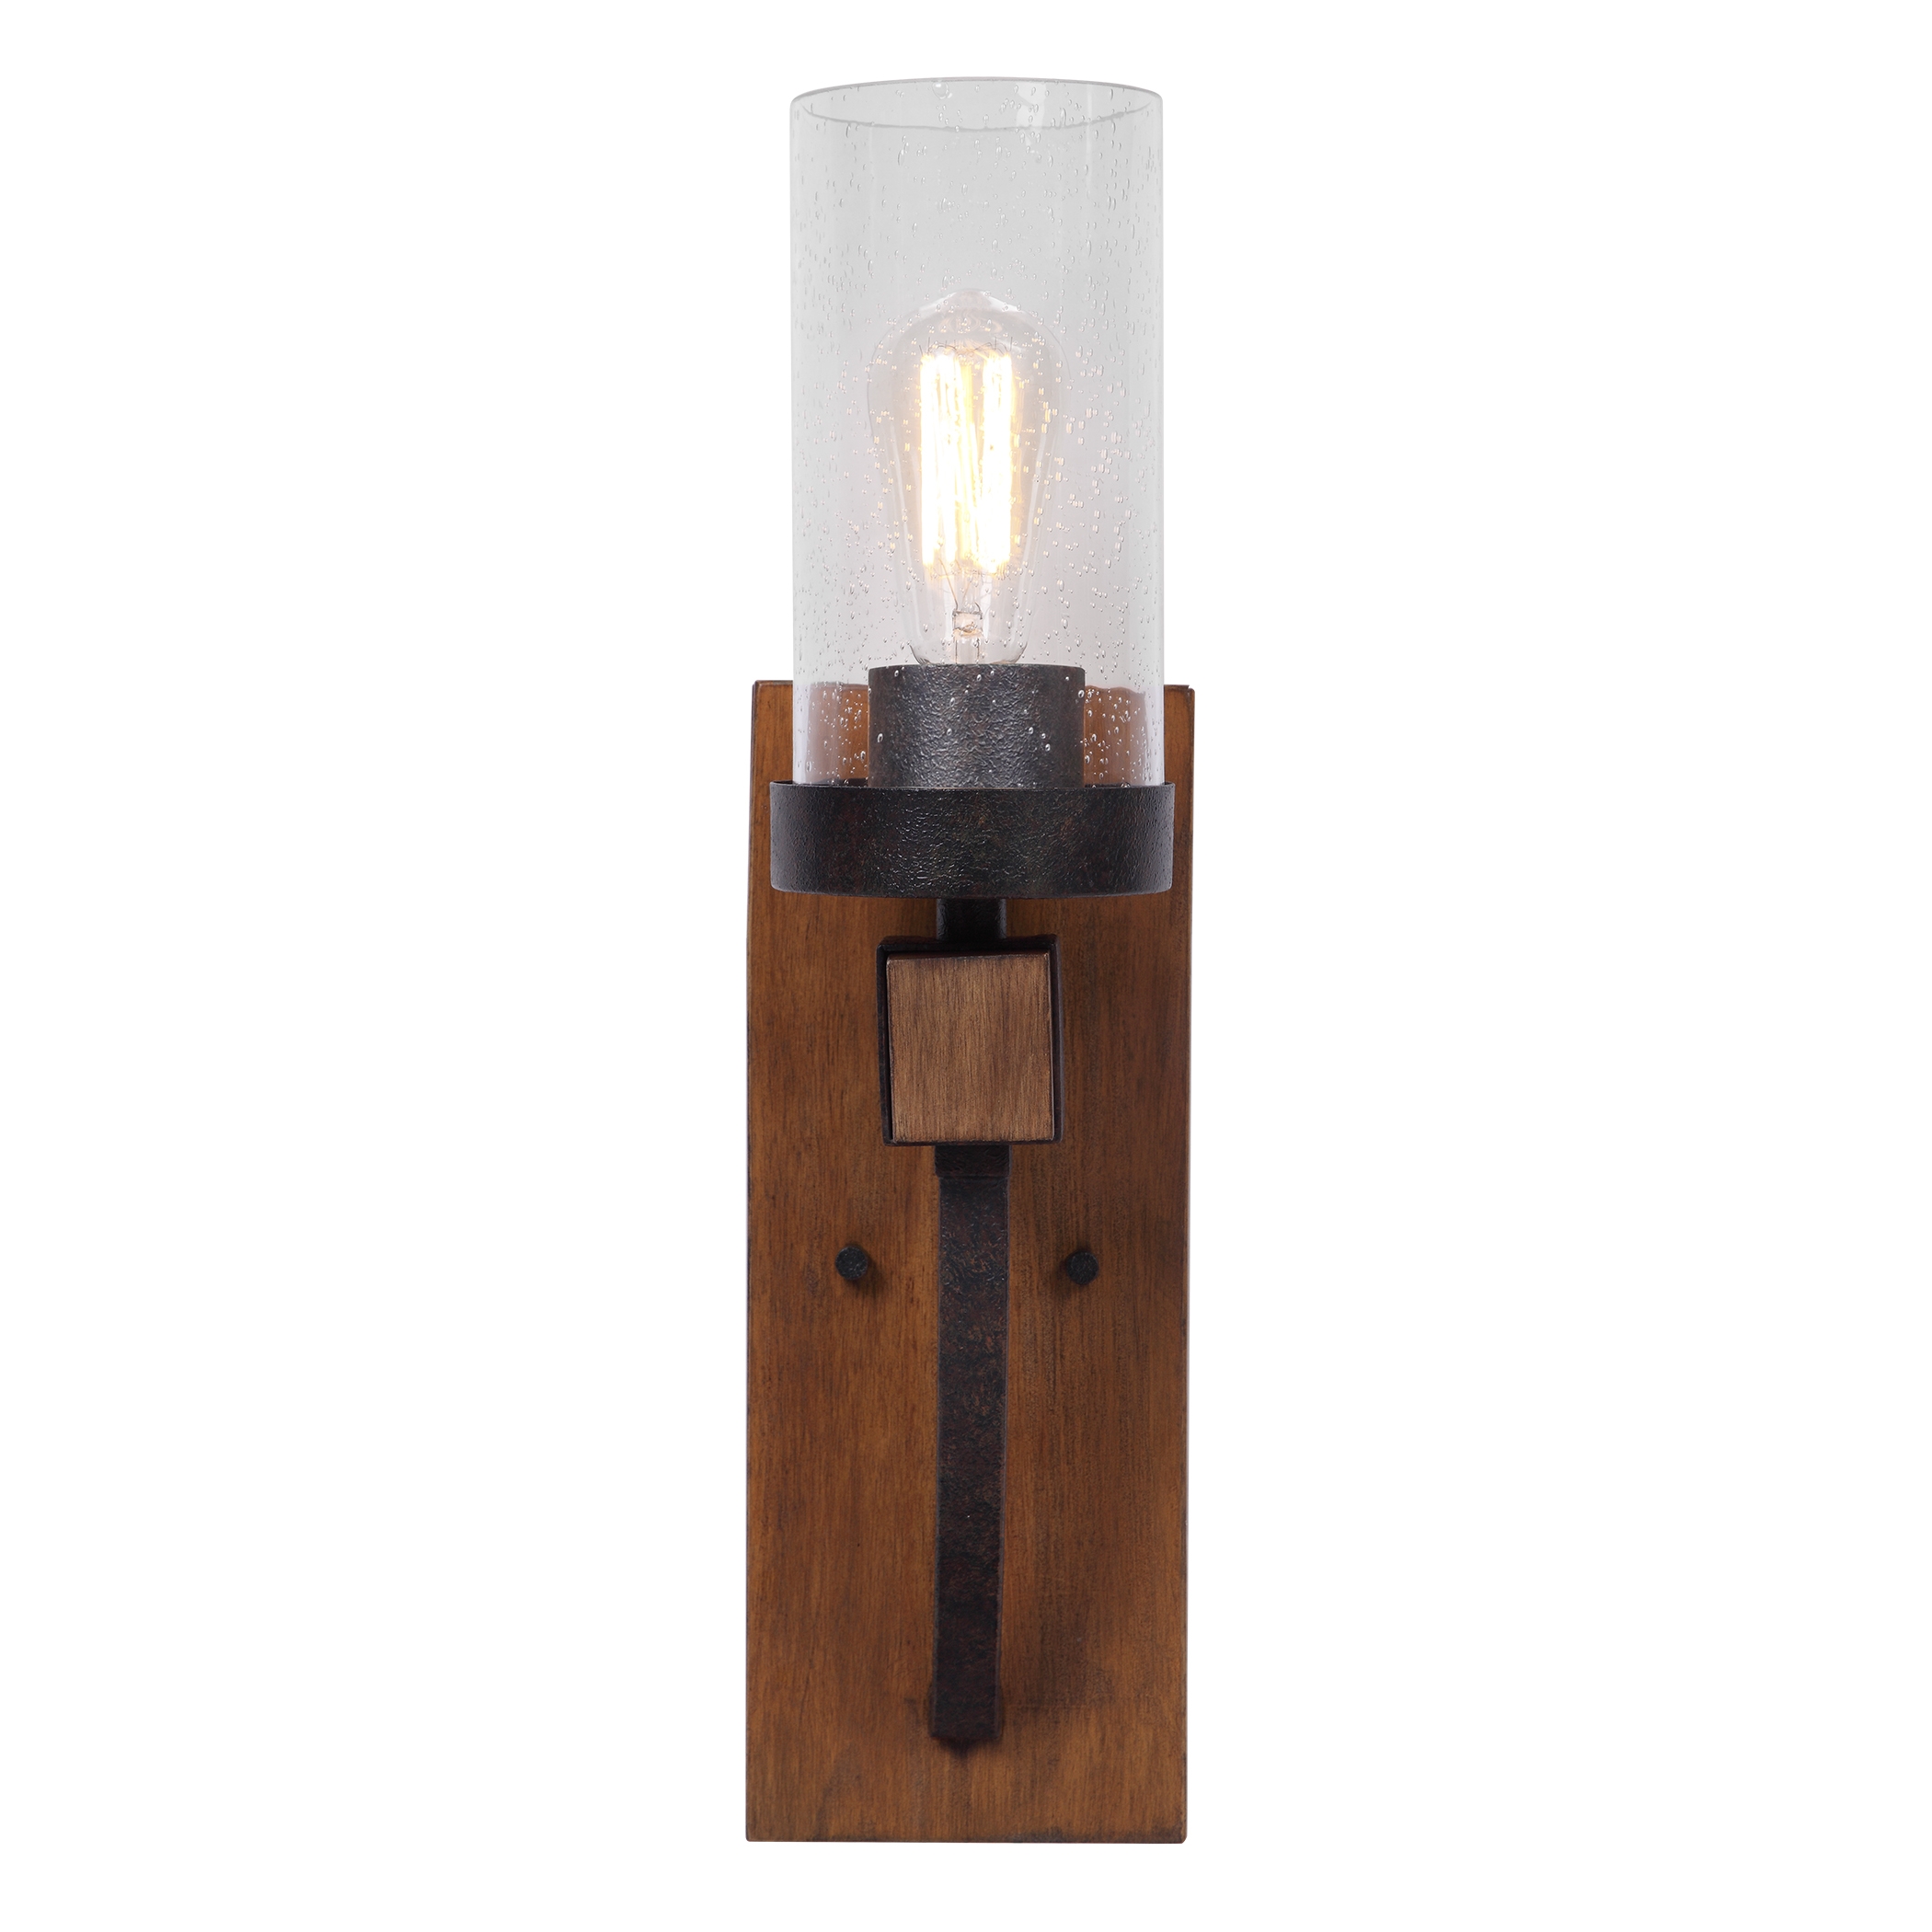 Atwood 1 Light Sconce - Image 2